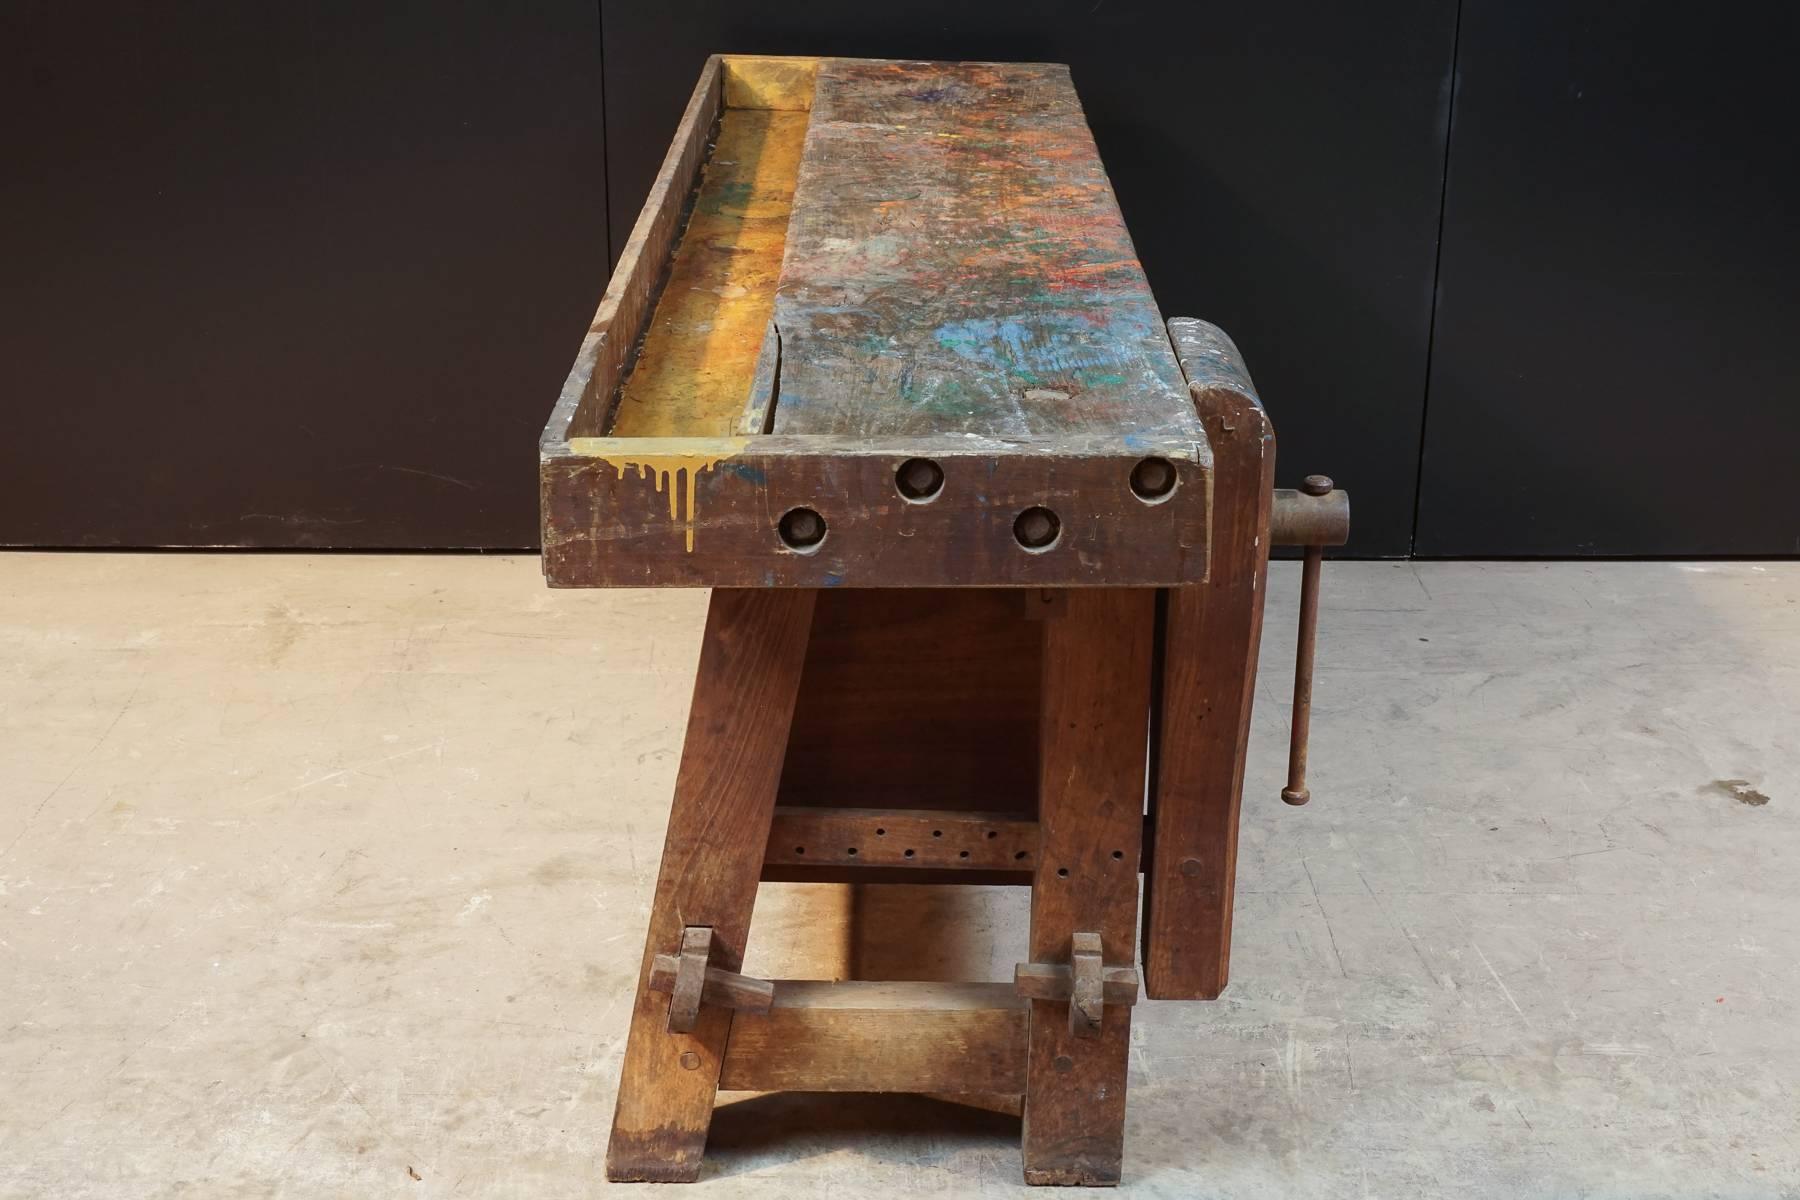 Primitive work bench from France, circa 1930. Very nice surface with original paint. Functioning clamp.